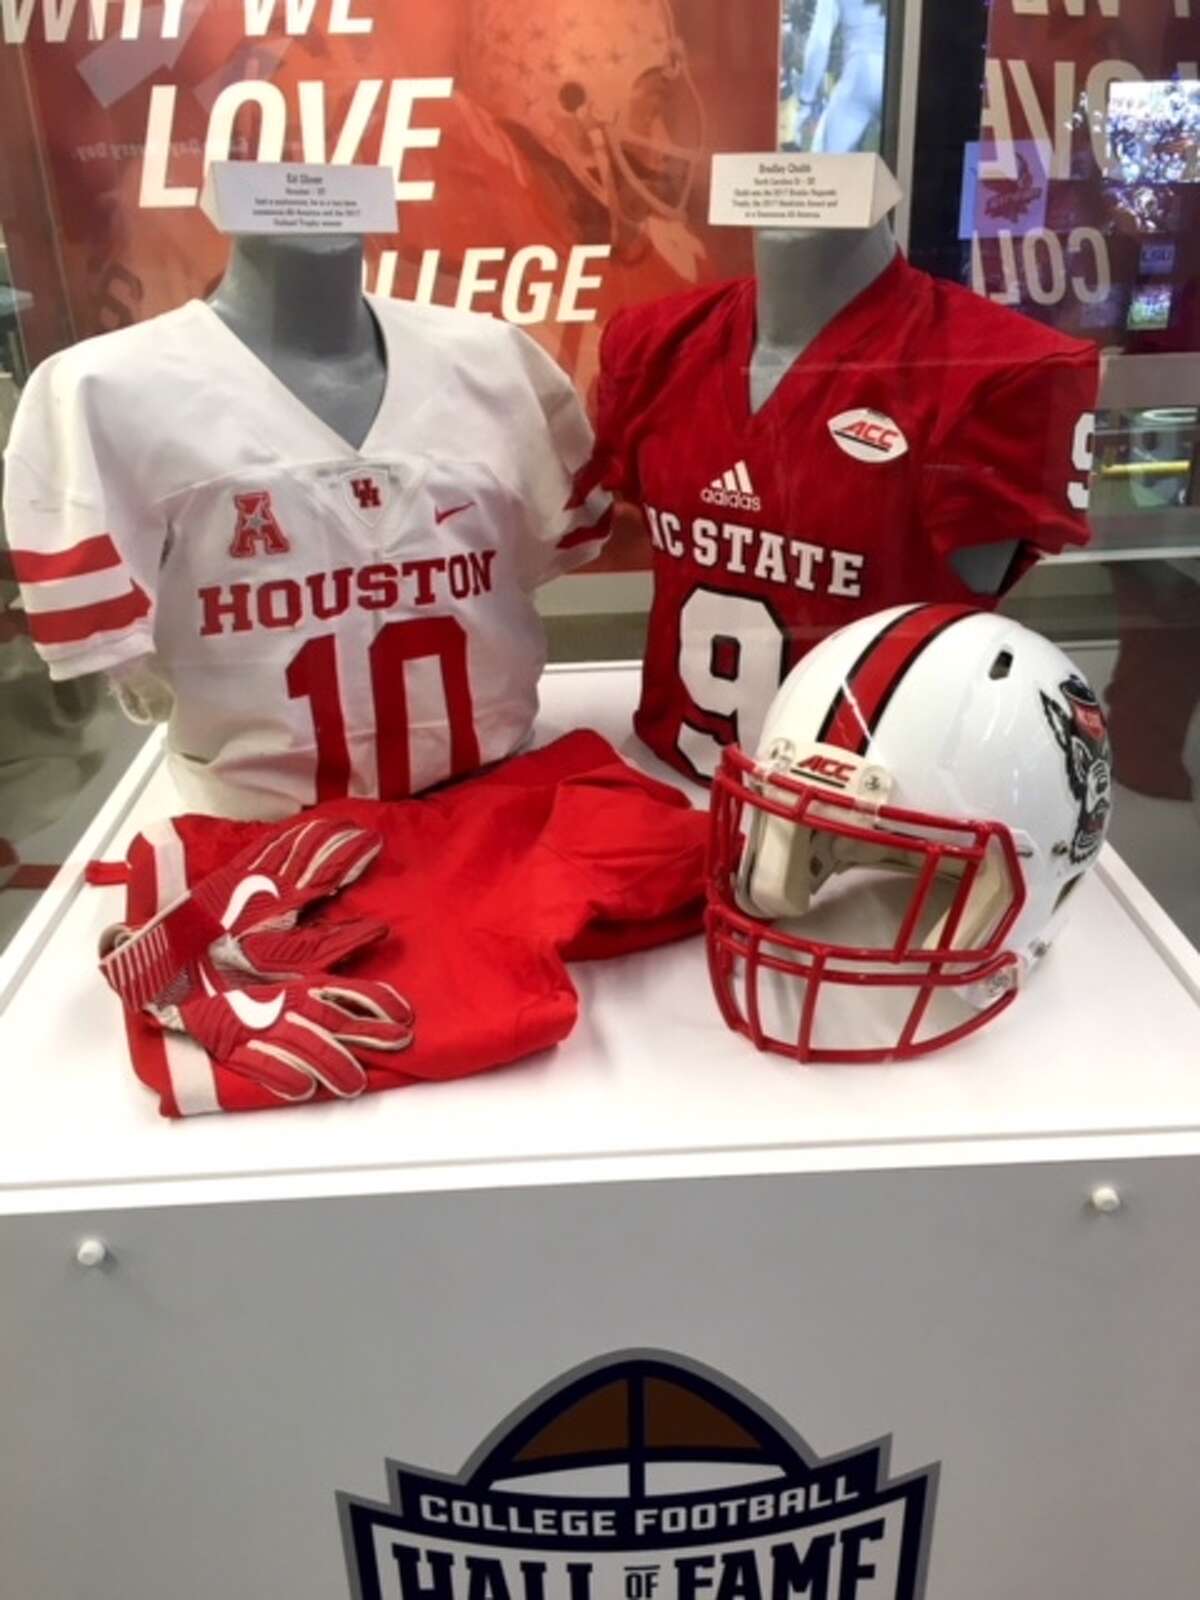 University of Houston's Ed Oliver has his uniform on display at the College Football Hall of Fame in Atlanta.